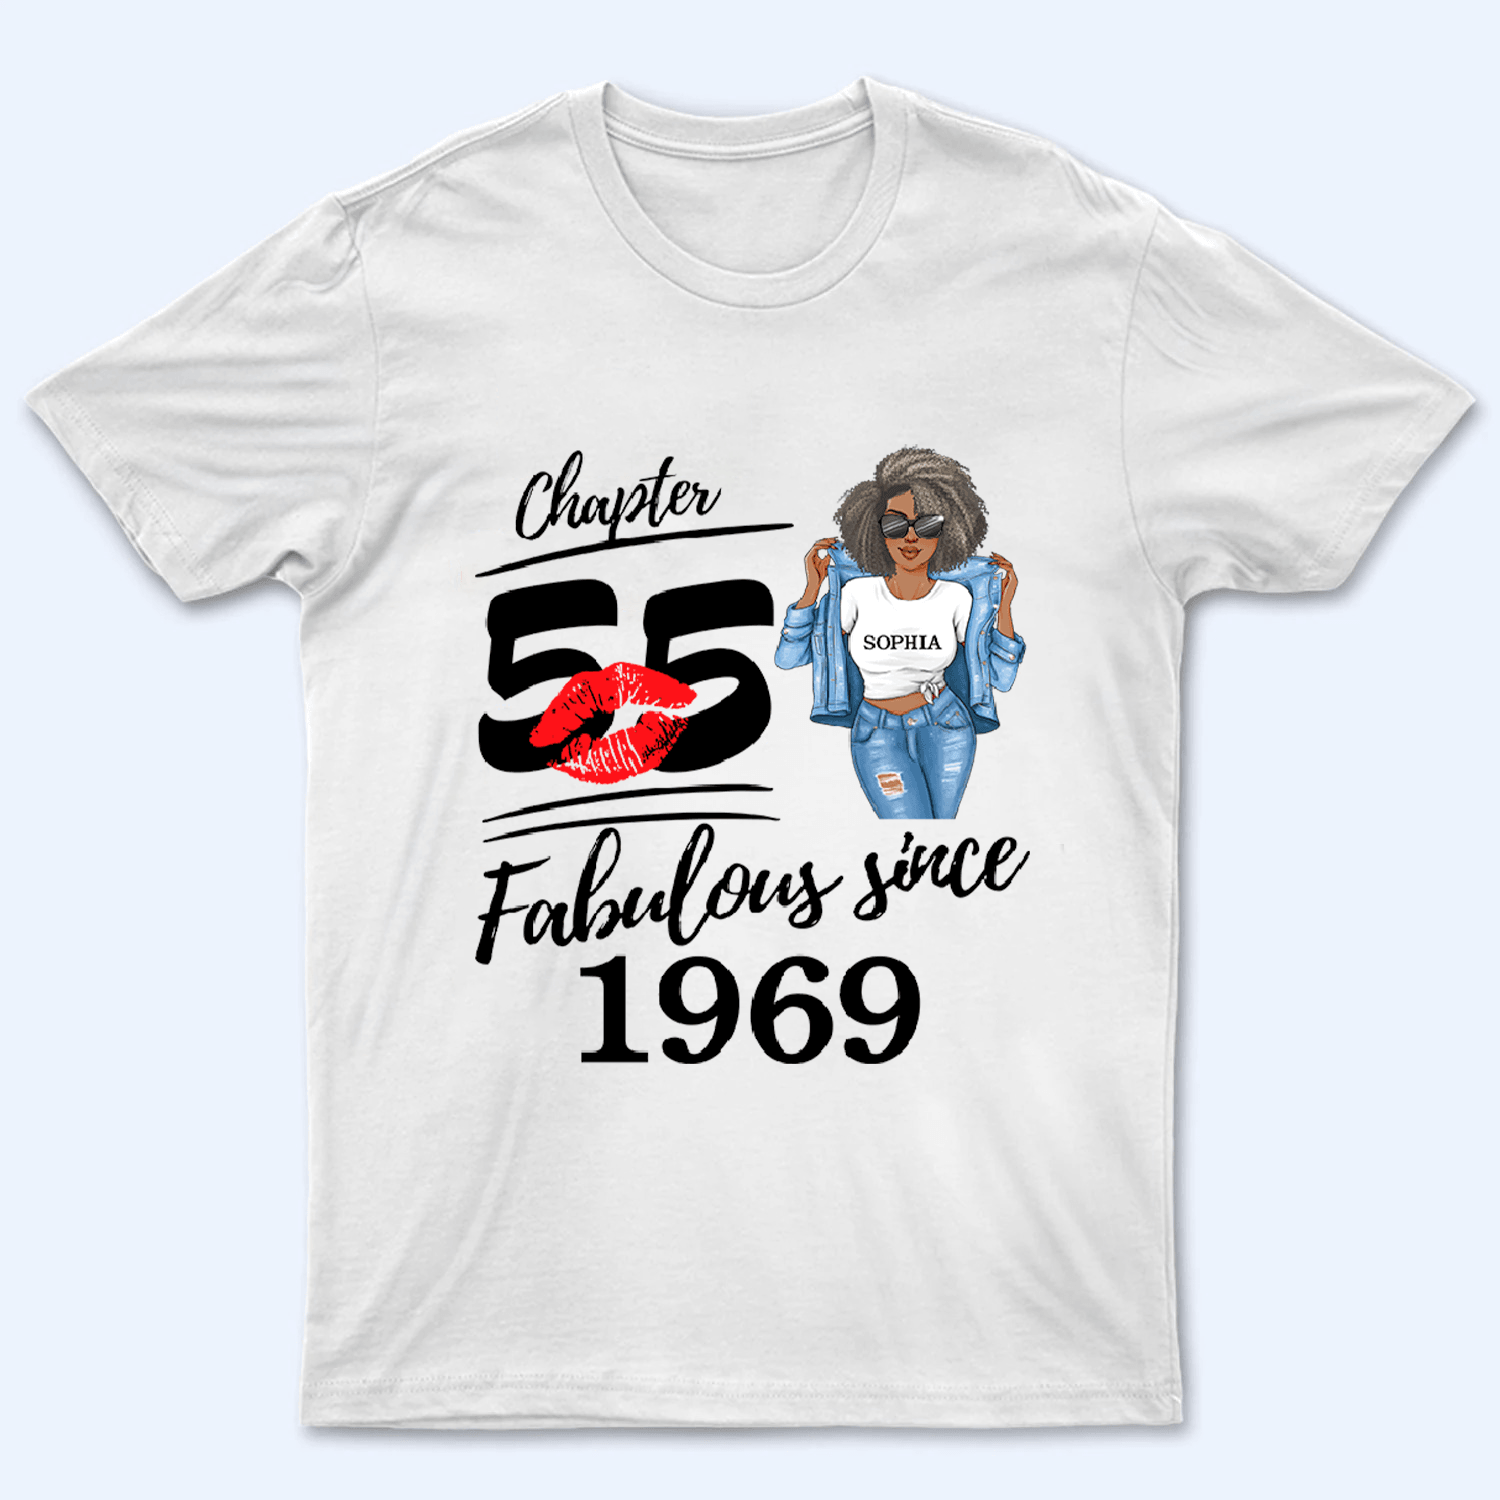 Custom Age & Year, Stepping Into a New Chapter, Turning New Age, Fabulous Since - Personalized T Shirt - Birthday, Loving, Funny Gift for Her, Wife, Mom, Mother, Grandma - Suzitee Store